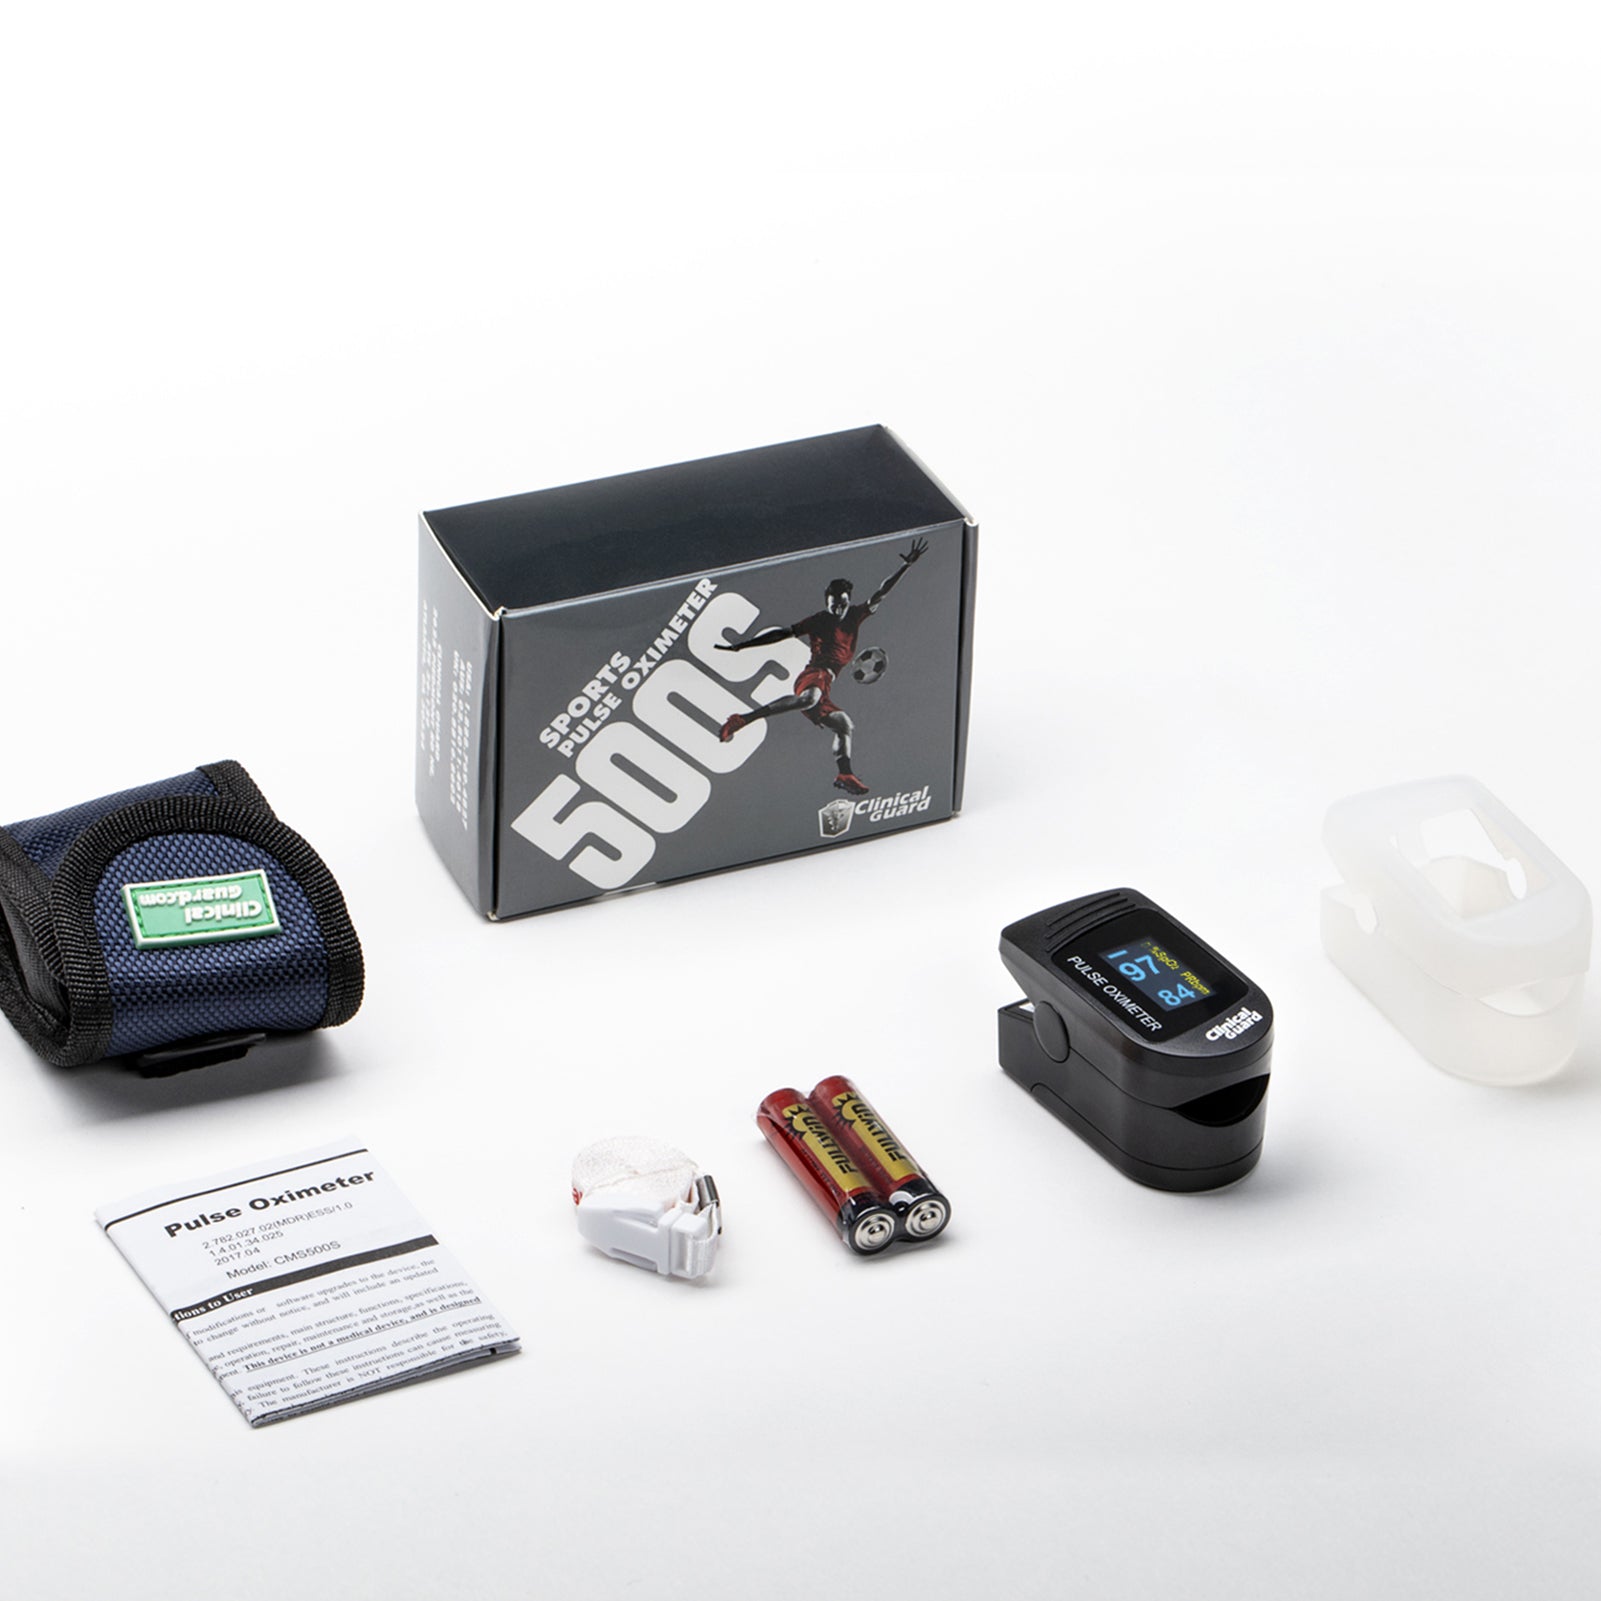 Finger Pulse Oximeter Clinical Guard 500 S Image 2 - Package Contents